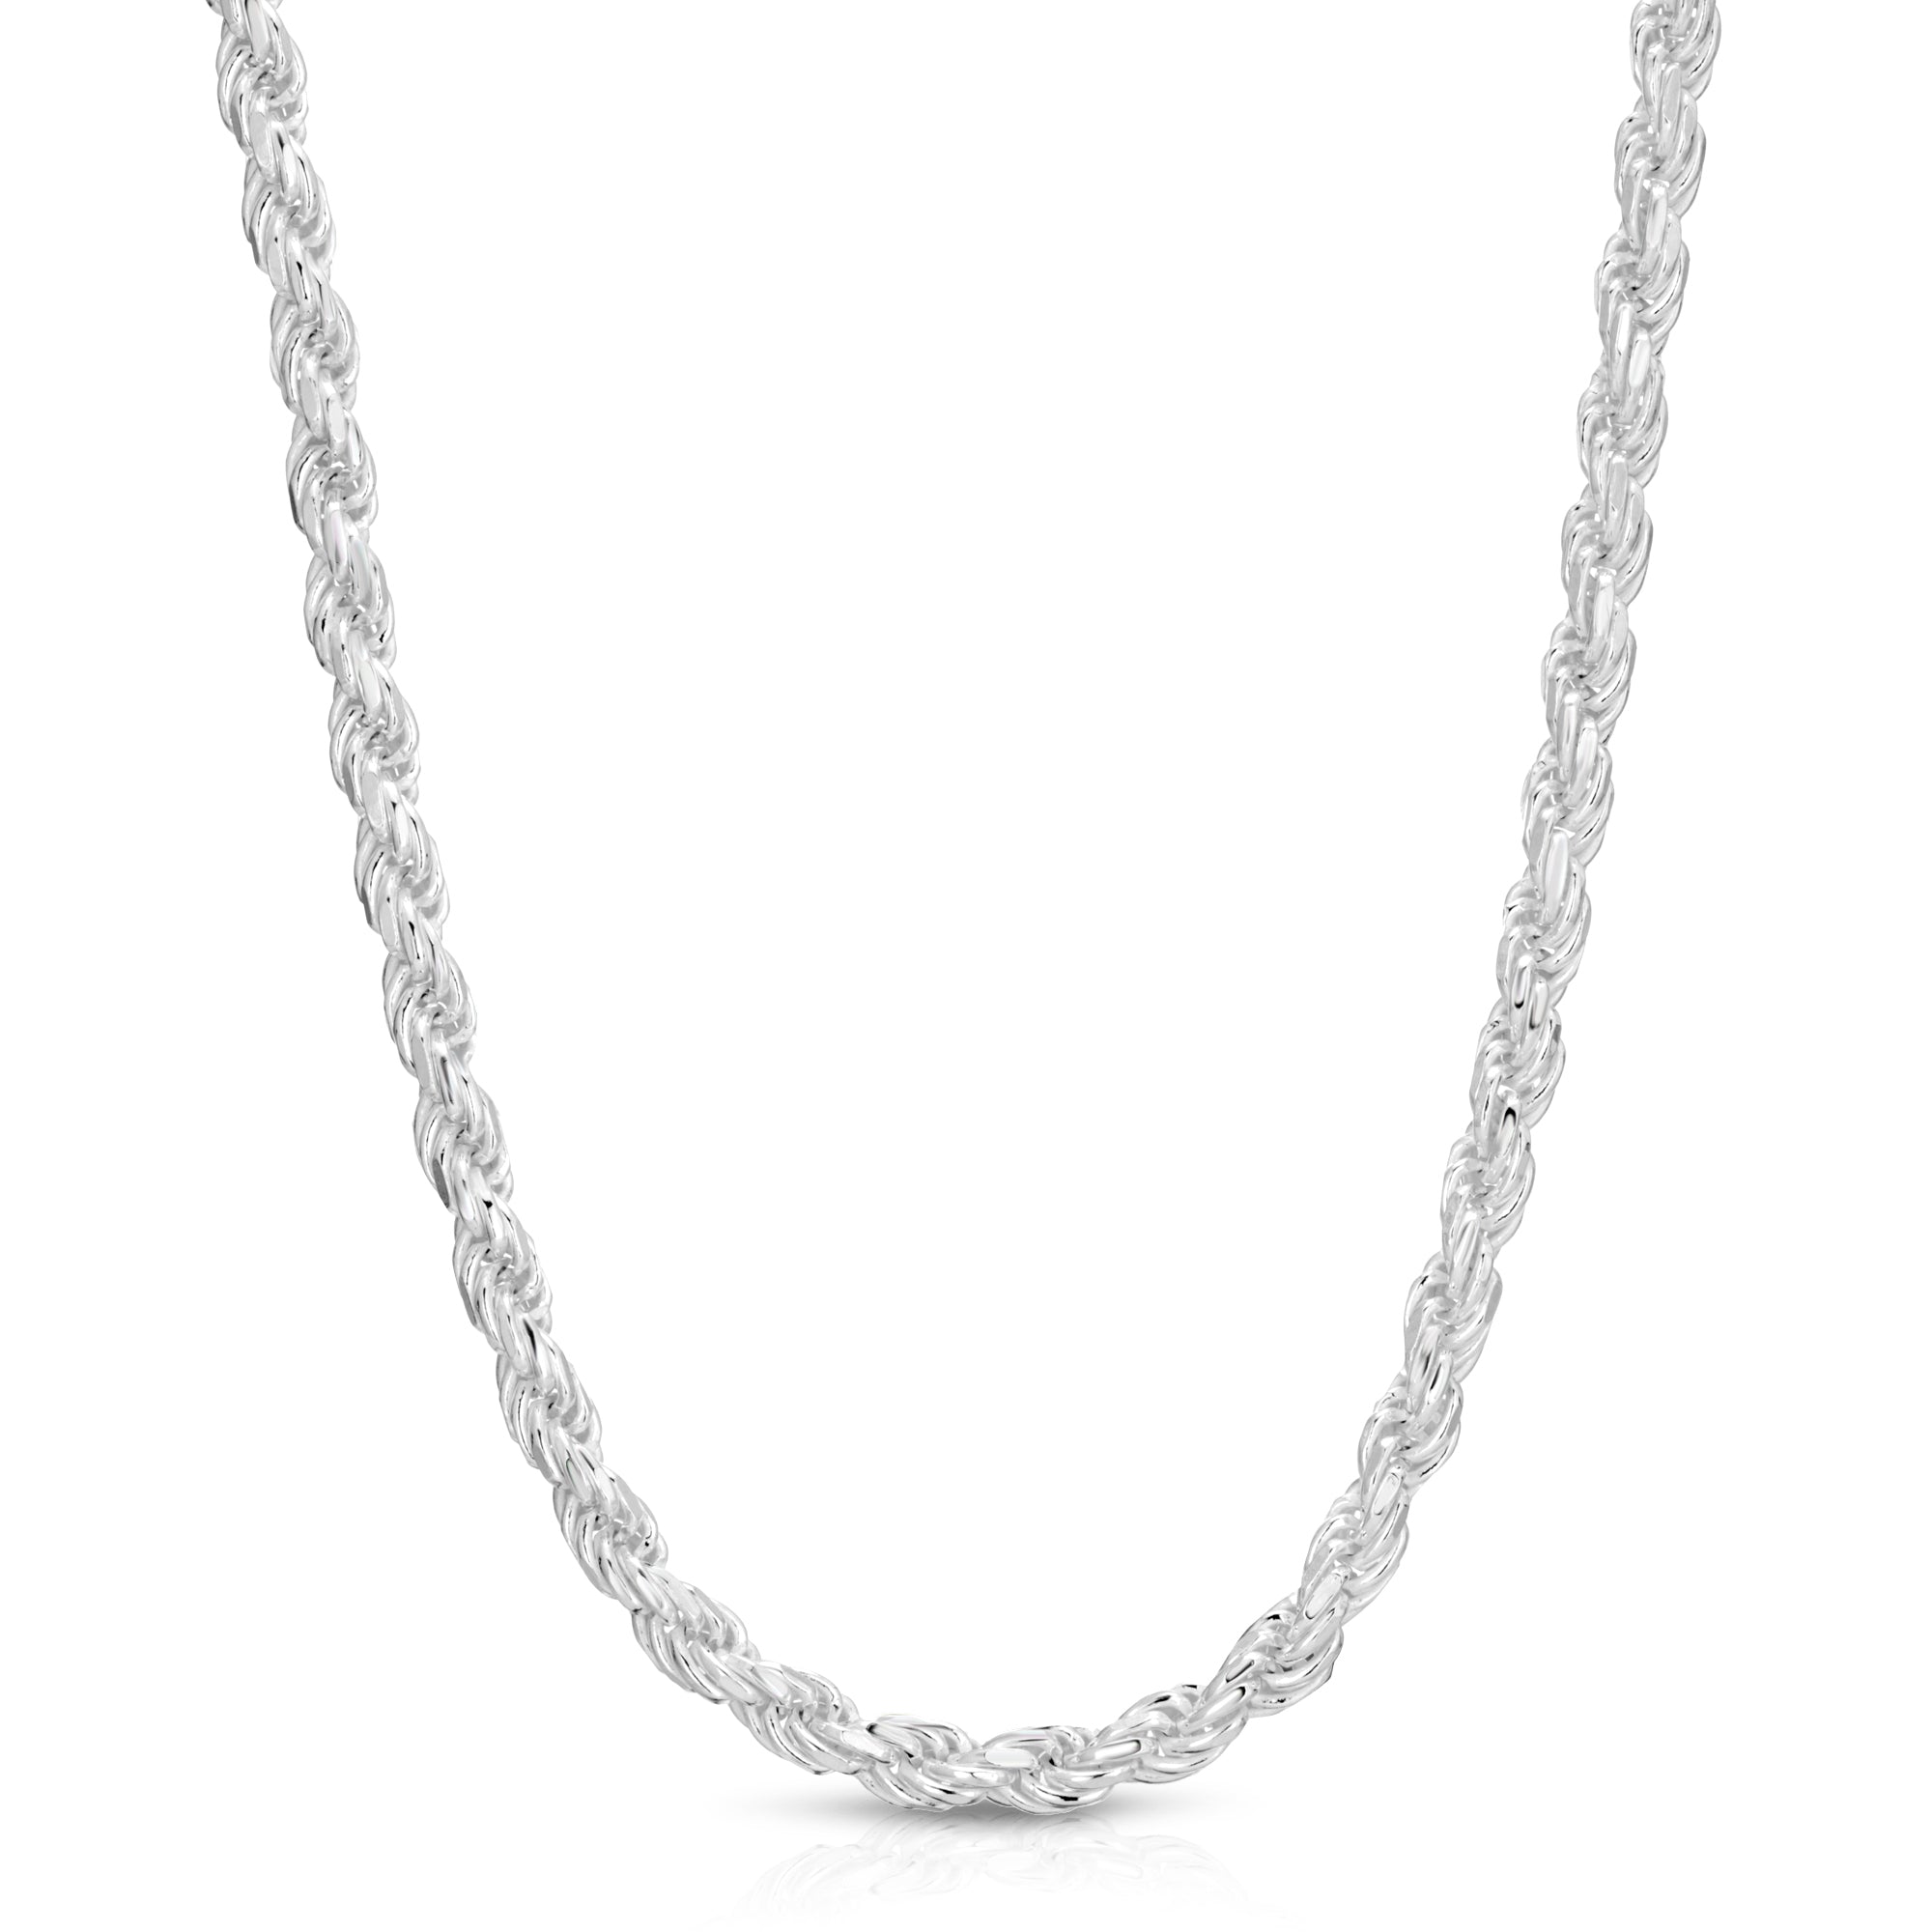 7mm Rope Sterling Silver Chain